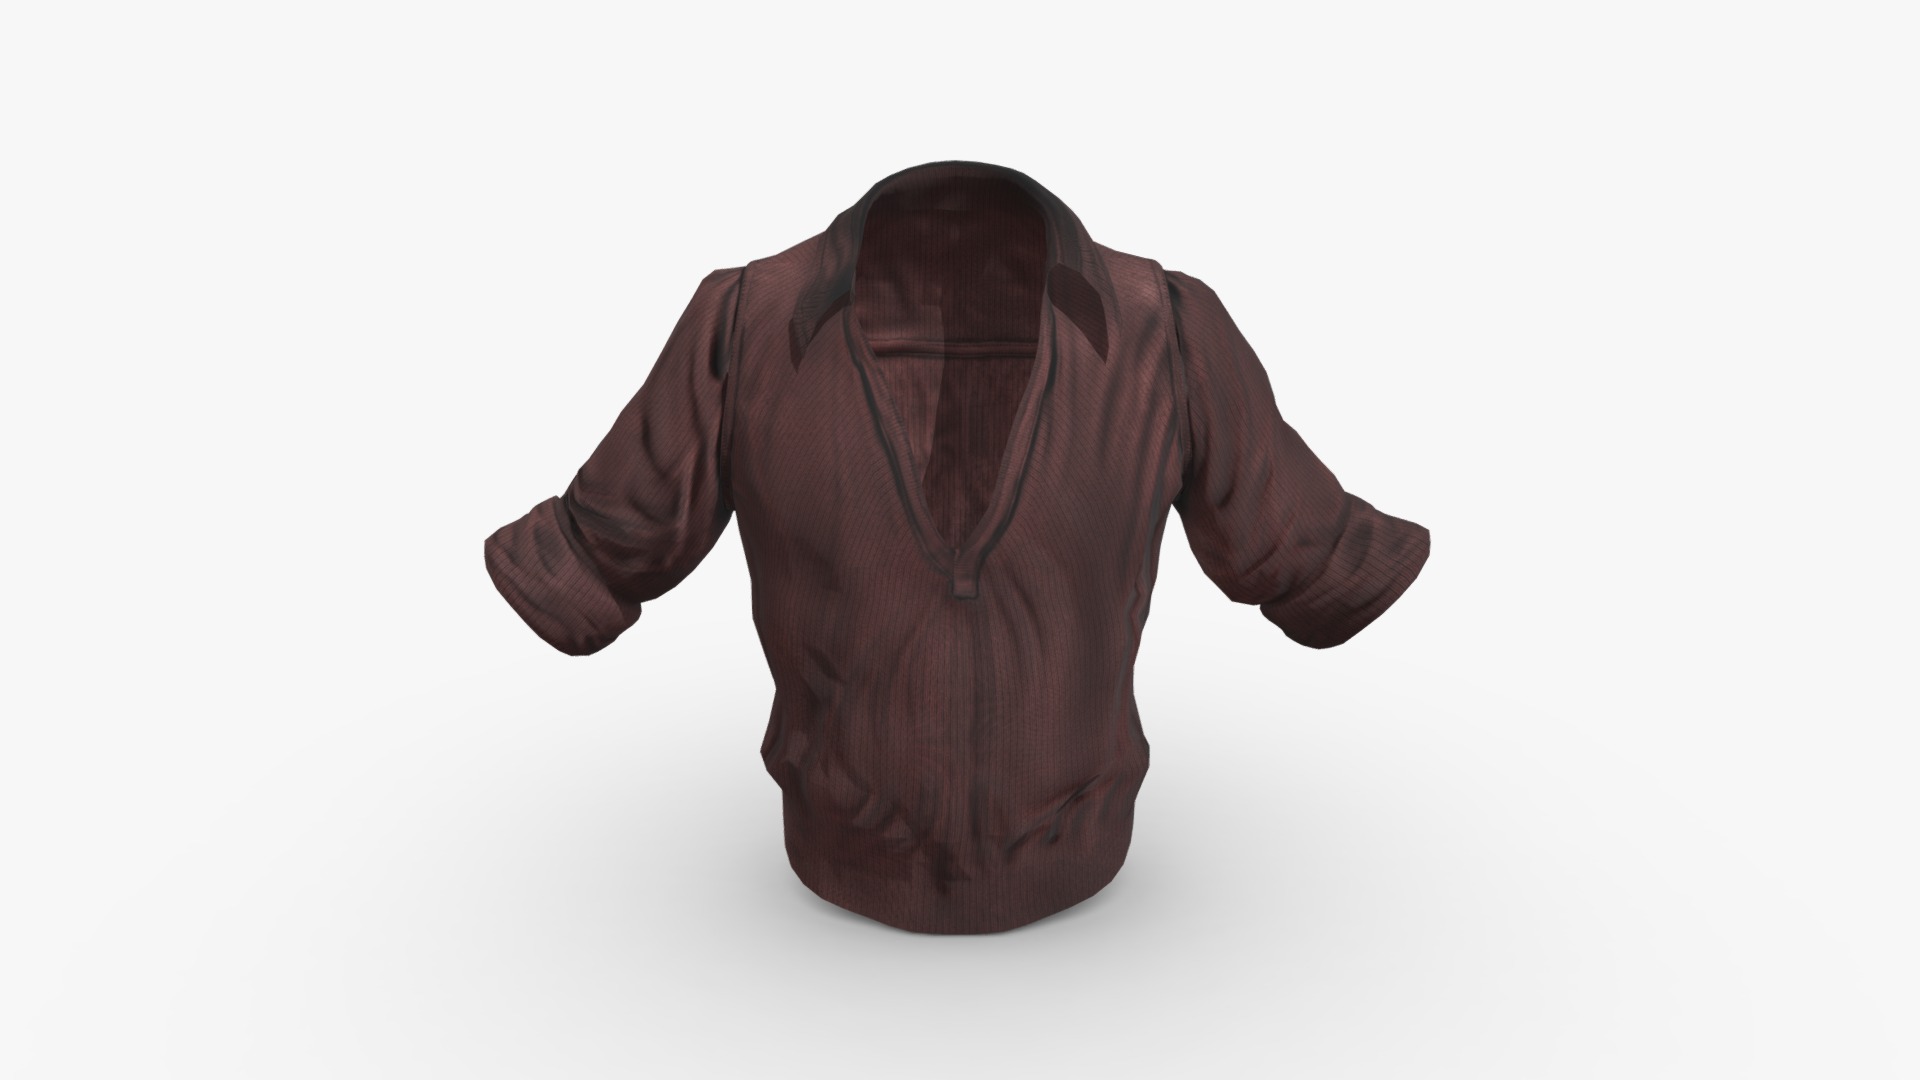 3D model Red Cotton Shirt - This is a 3D model of the Red Cotton Shirt. The 3D model is about a brown hooded sweatshirt.